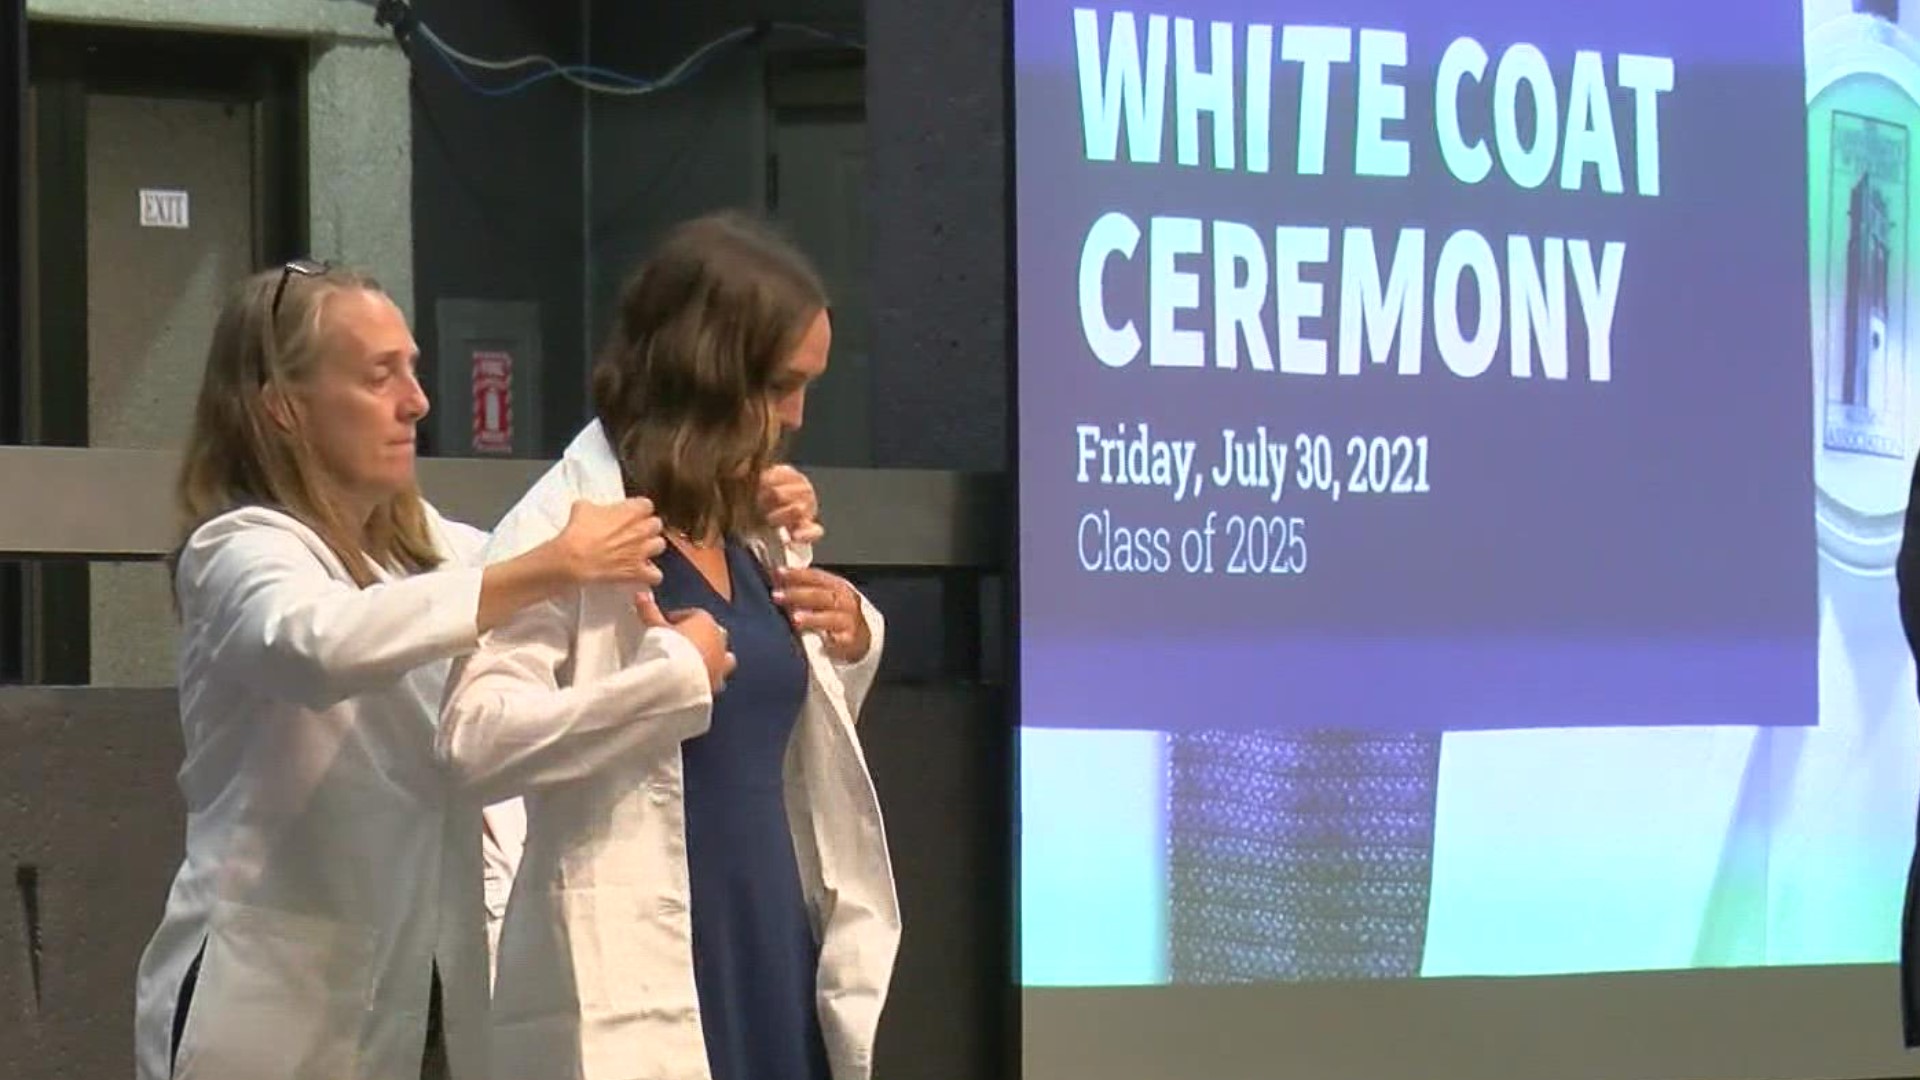 UTMC student Hunter Eby says putting on the white coat for the first time is a symbol of commitment to serving others. 176 students make up the class of 2025.